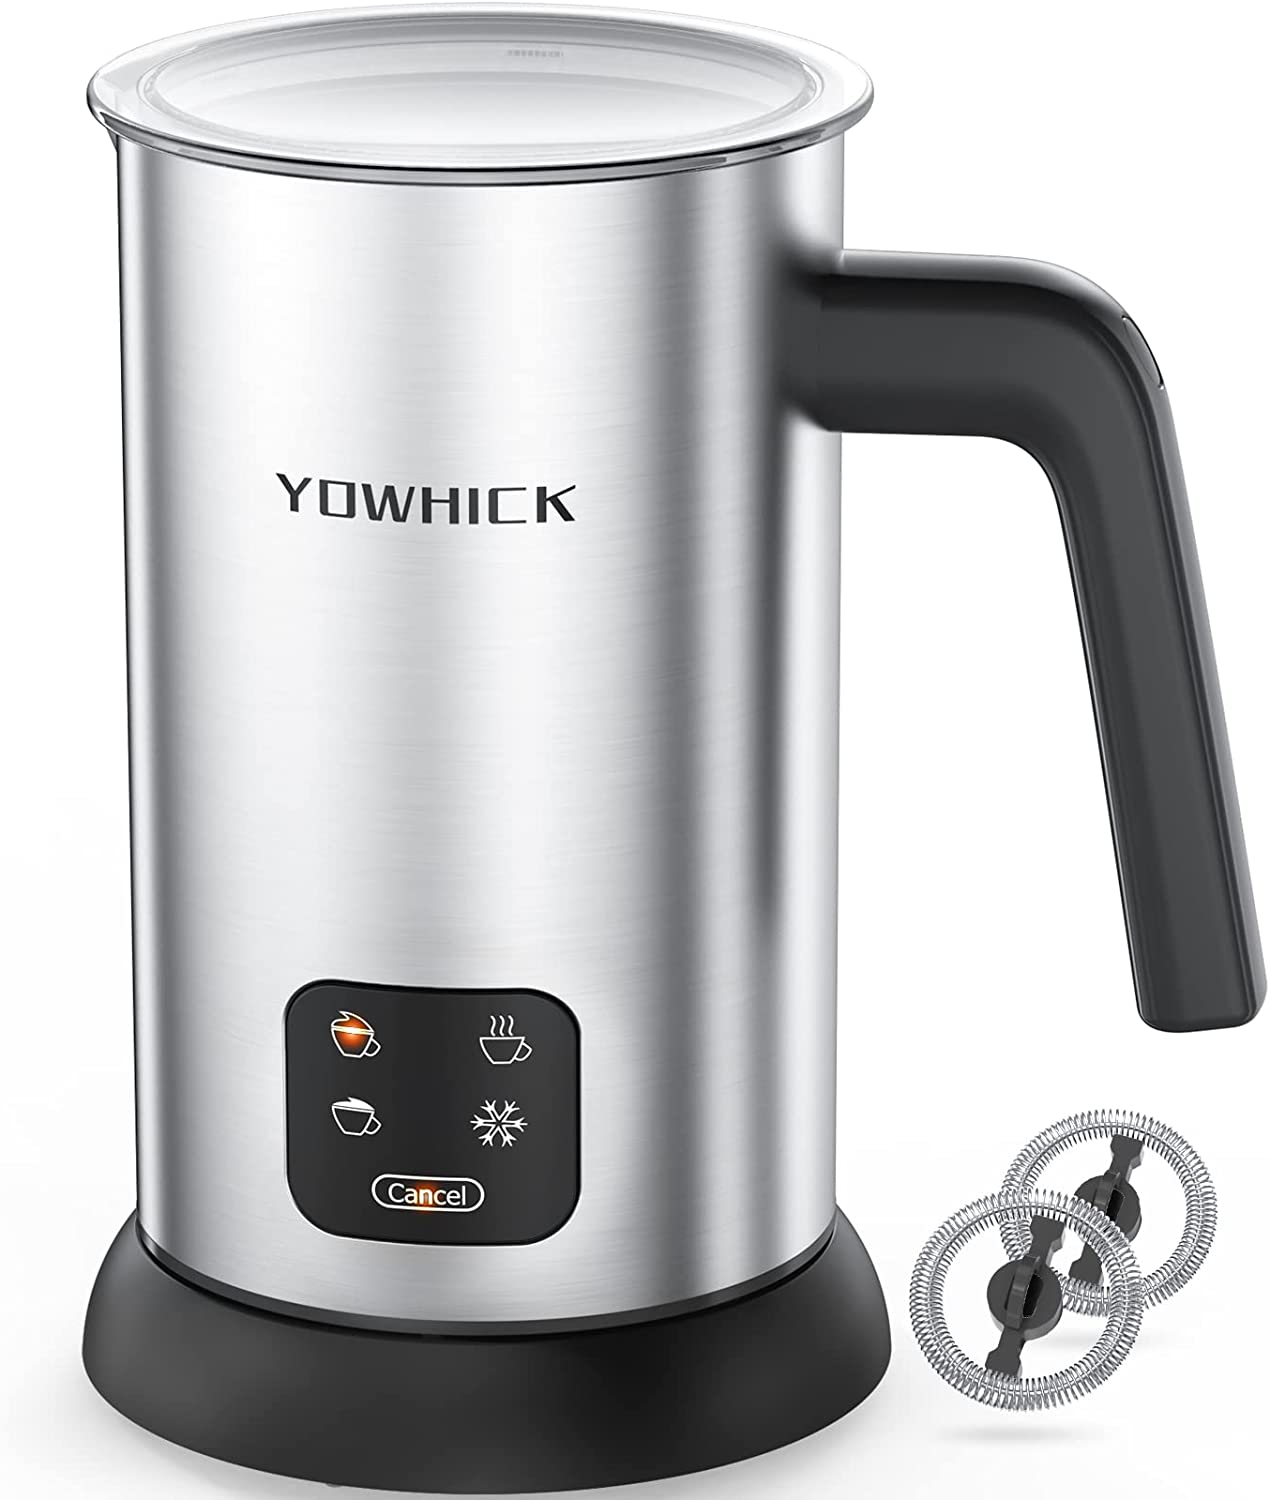 YOWHICK Milk Frother for Coffee, Milk Steamer and Frother, 4 Modes Aut